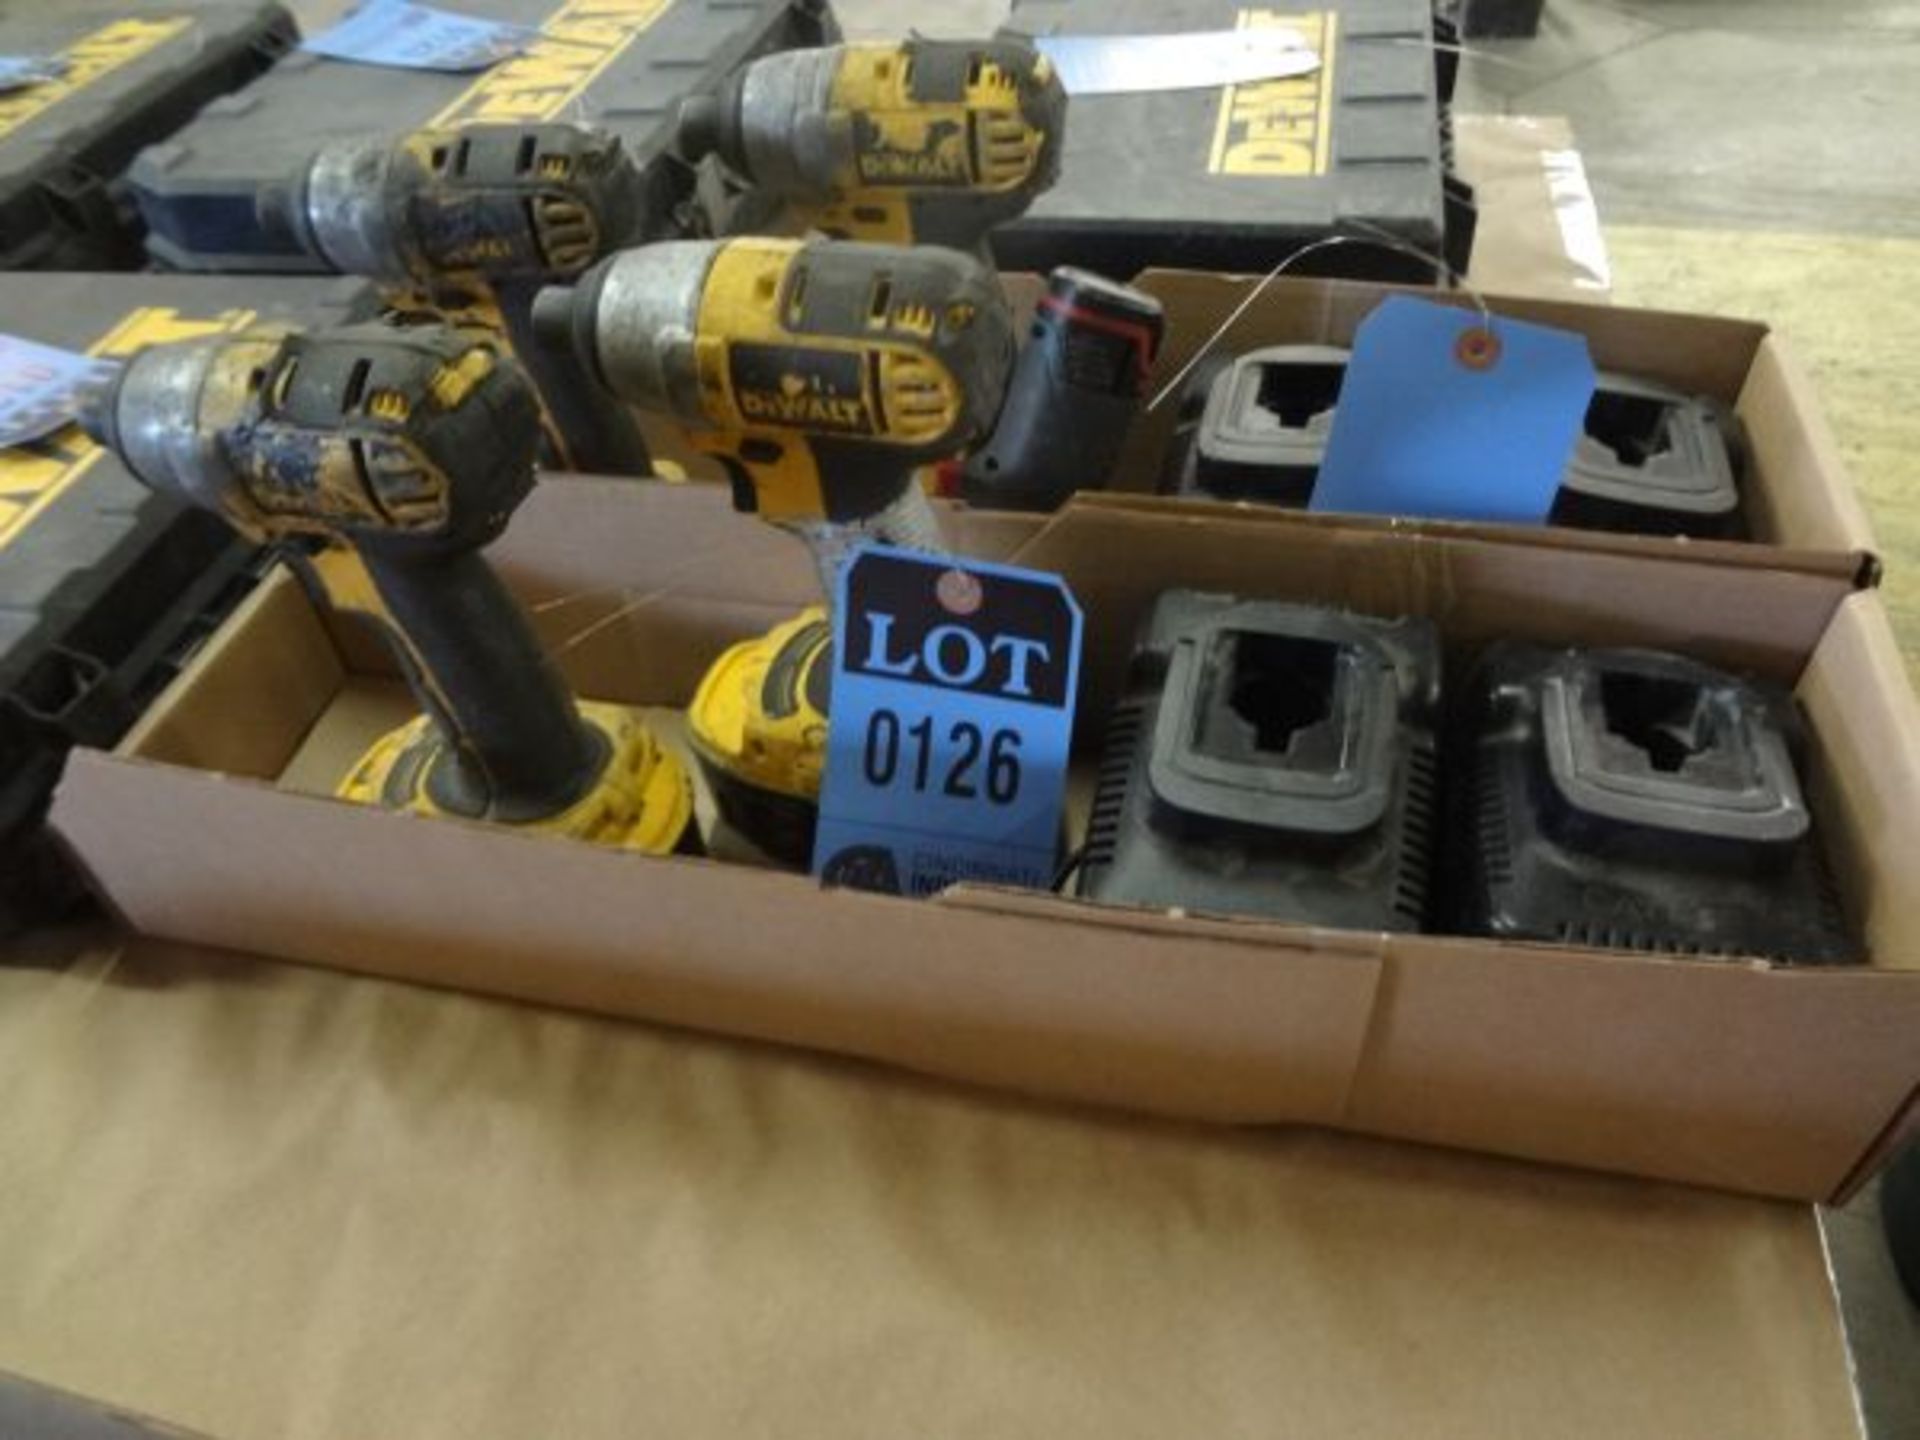 1/4" DEWALT CORDLESS IMPACT DRIVER WITH CHARGER